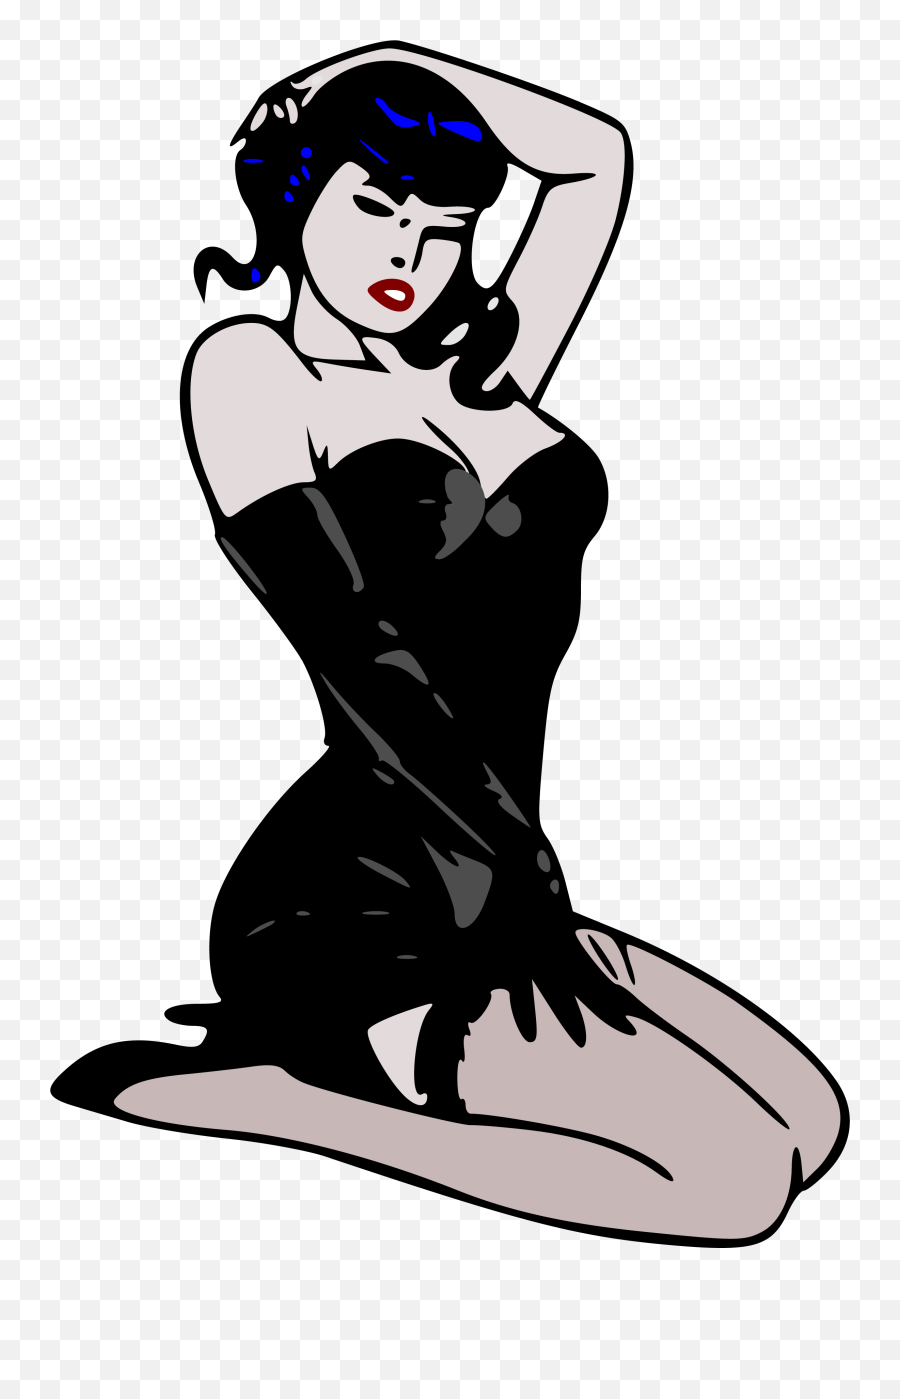 Pin - Up Girl Clipart Panda Free Clipart Images Pin Up Girl Art Emoji,Girls Clipart